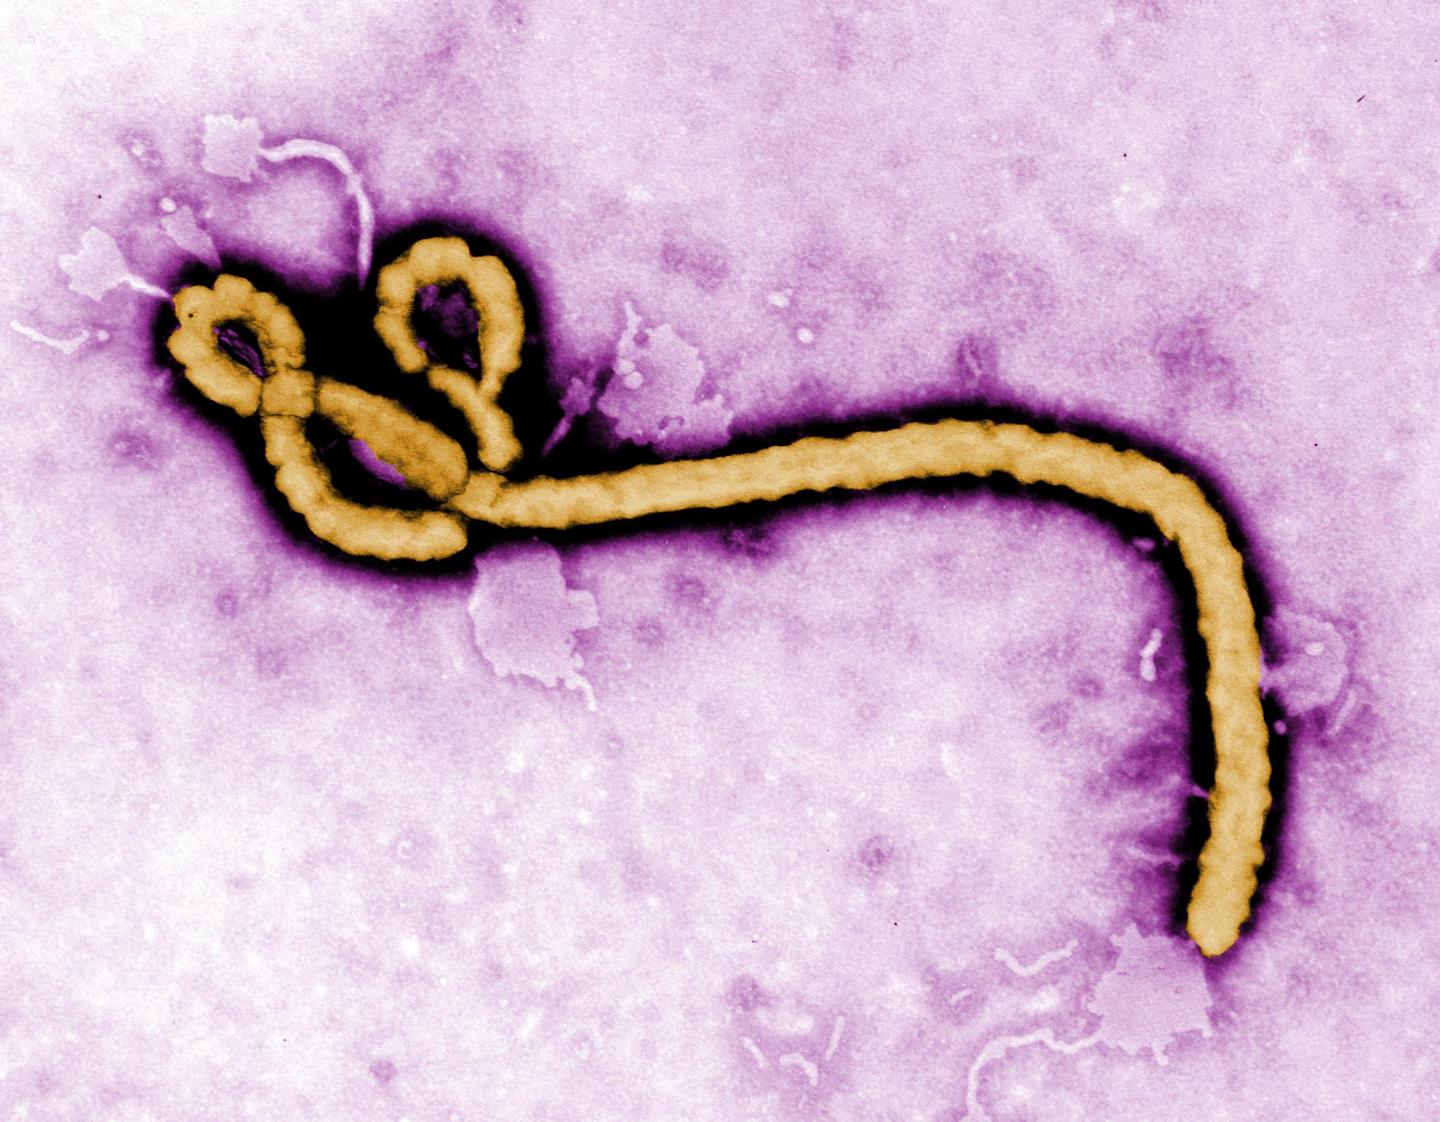 Lessons from Ebola: New Approach Improves Disease Outbreak Management